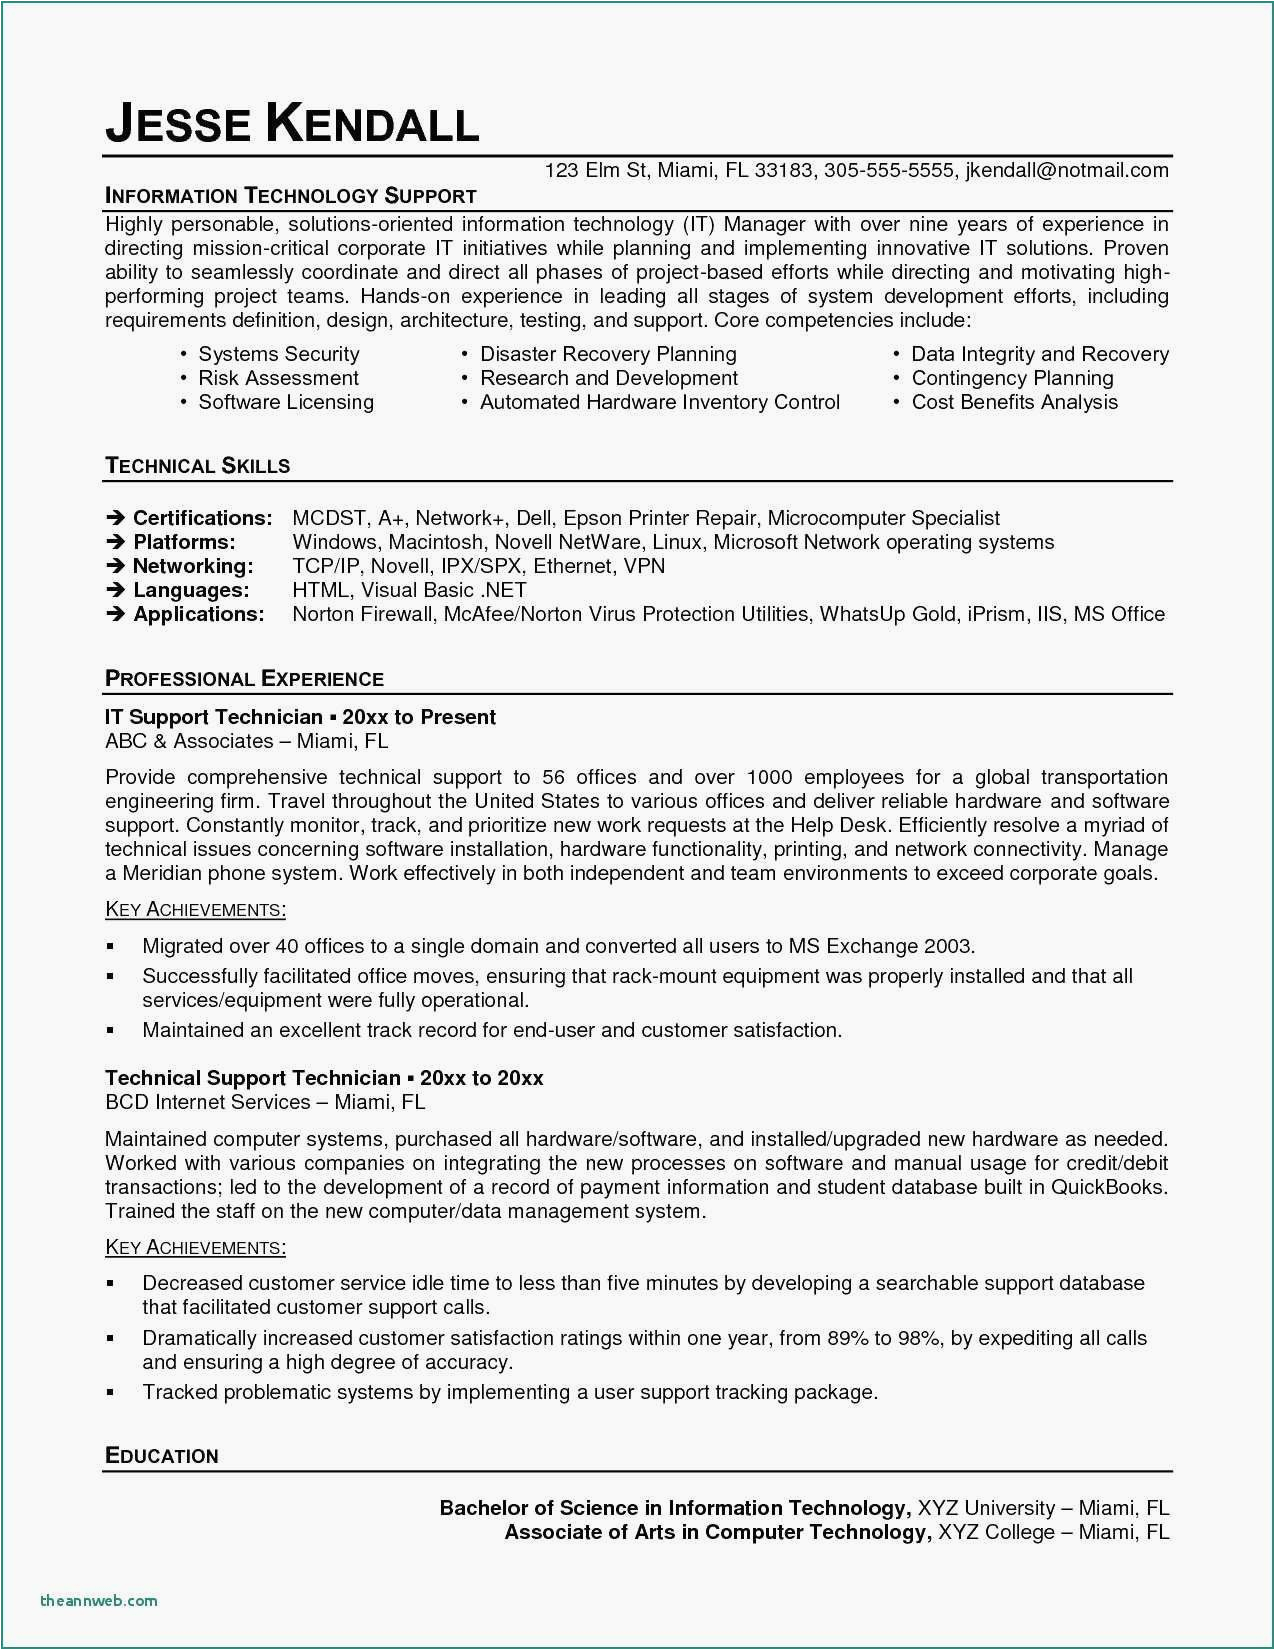 Sample Resume with Microsoft Certification Logo Operational Excellence Examples